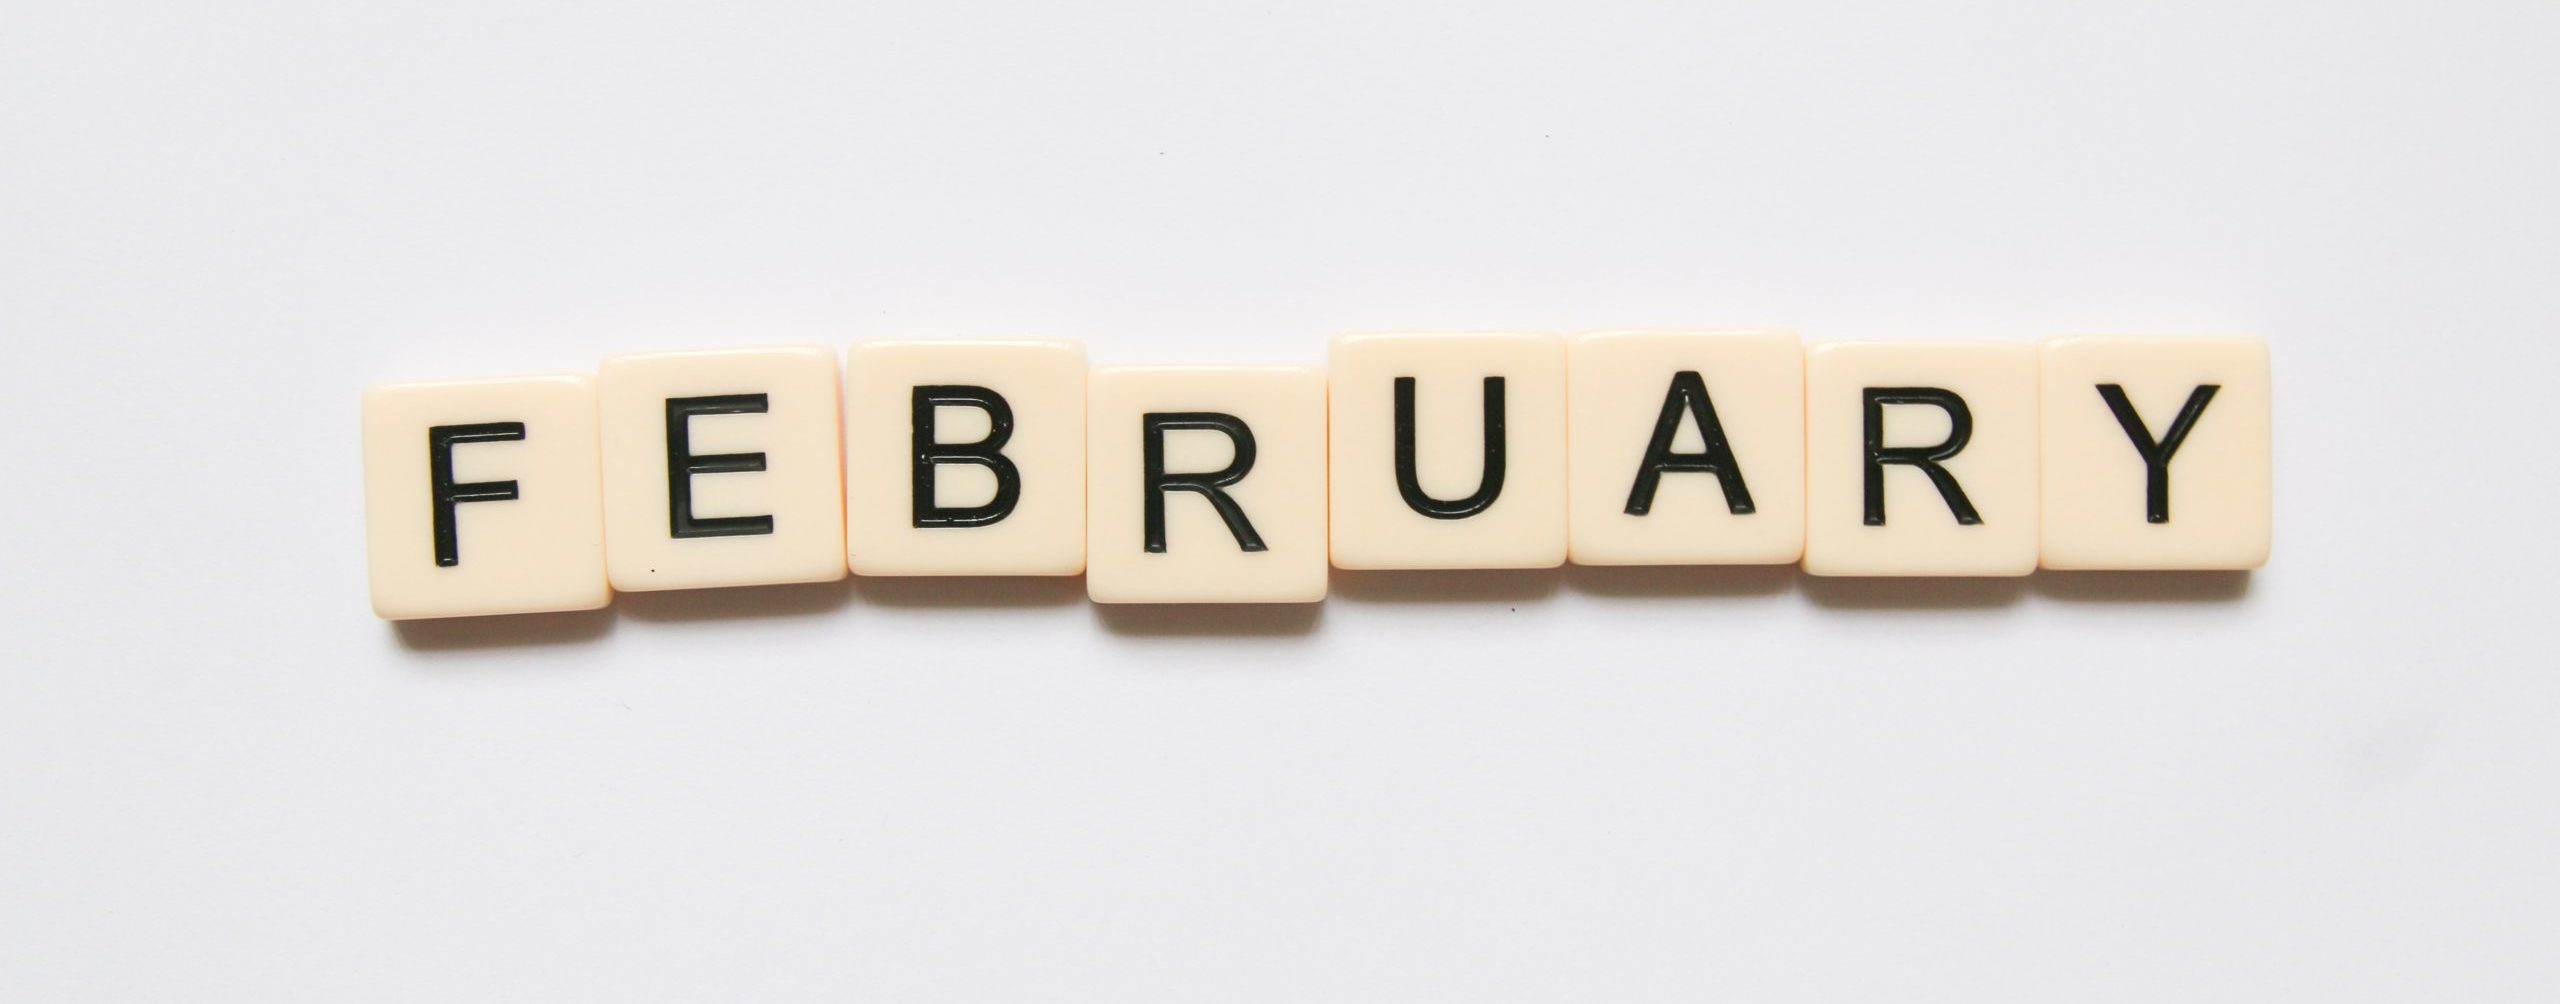 february spelled out in scrabble tiles